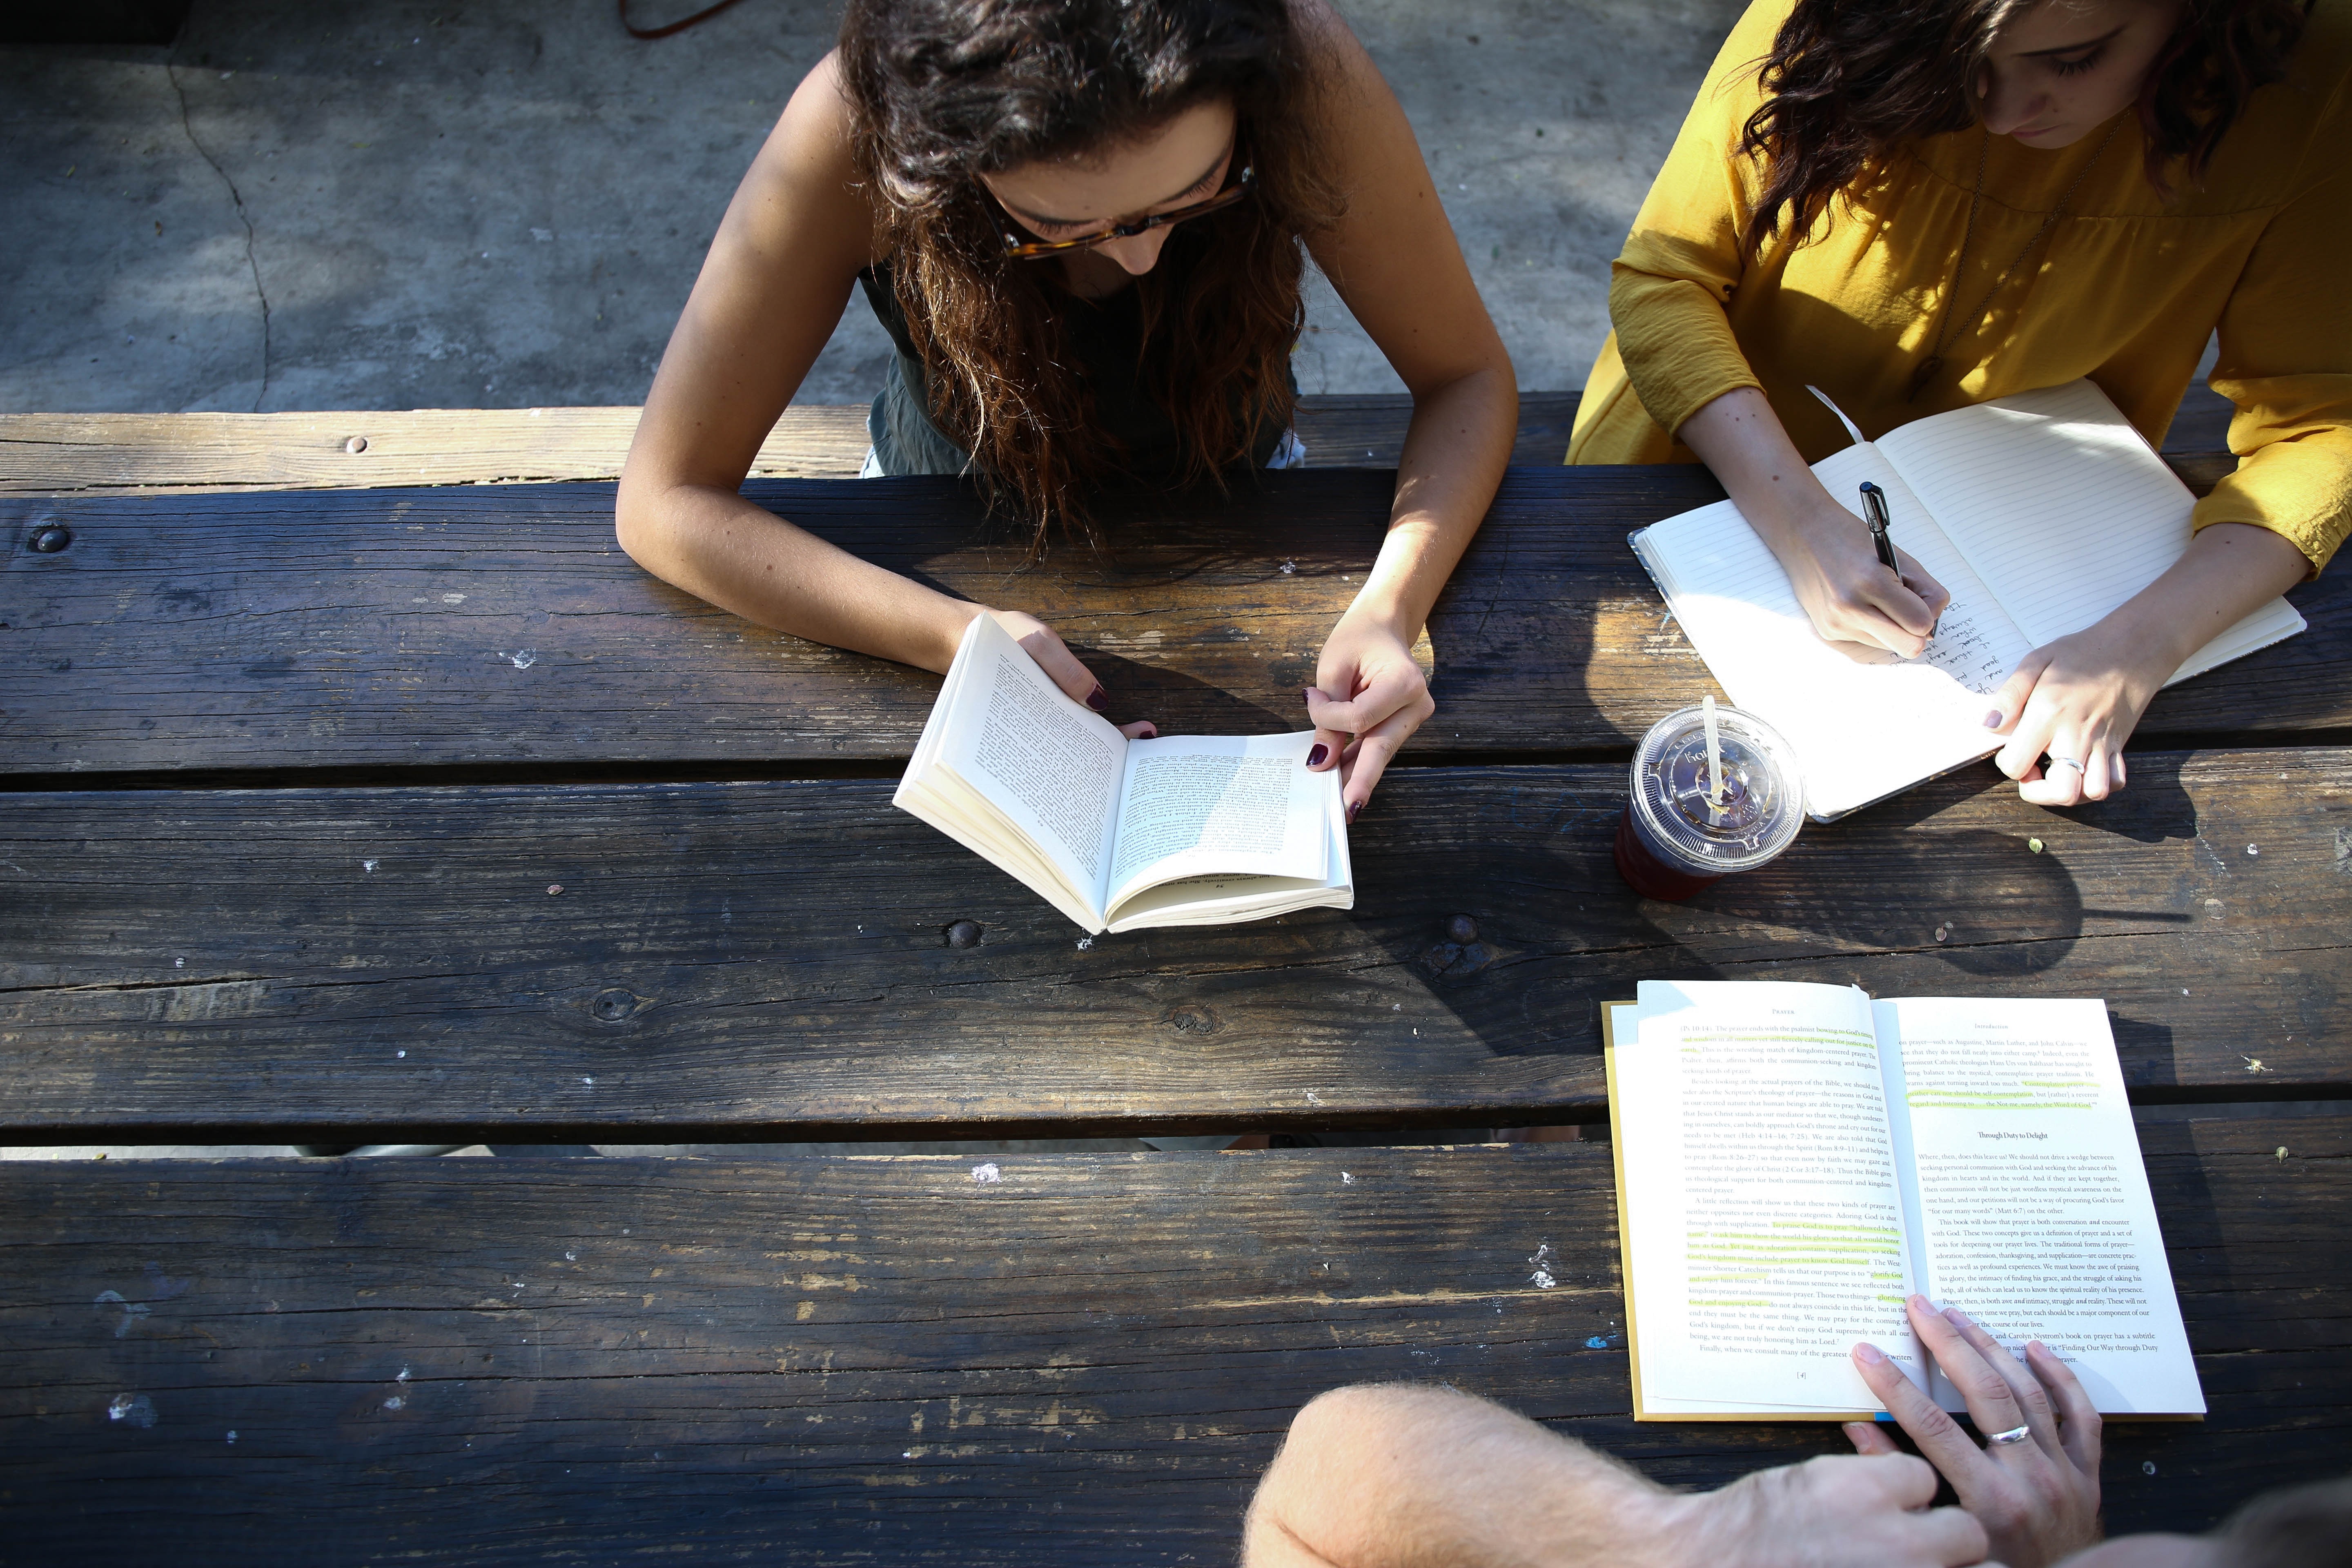 Image of three undergraduate students, two females, one male, reading and taking notes around a rustic wooden table outdoors